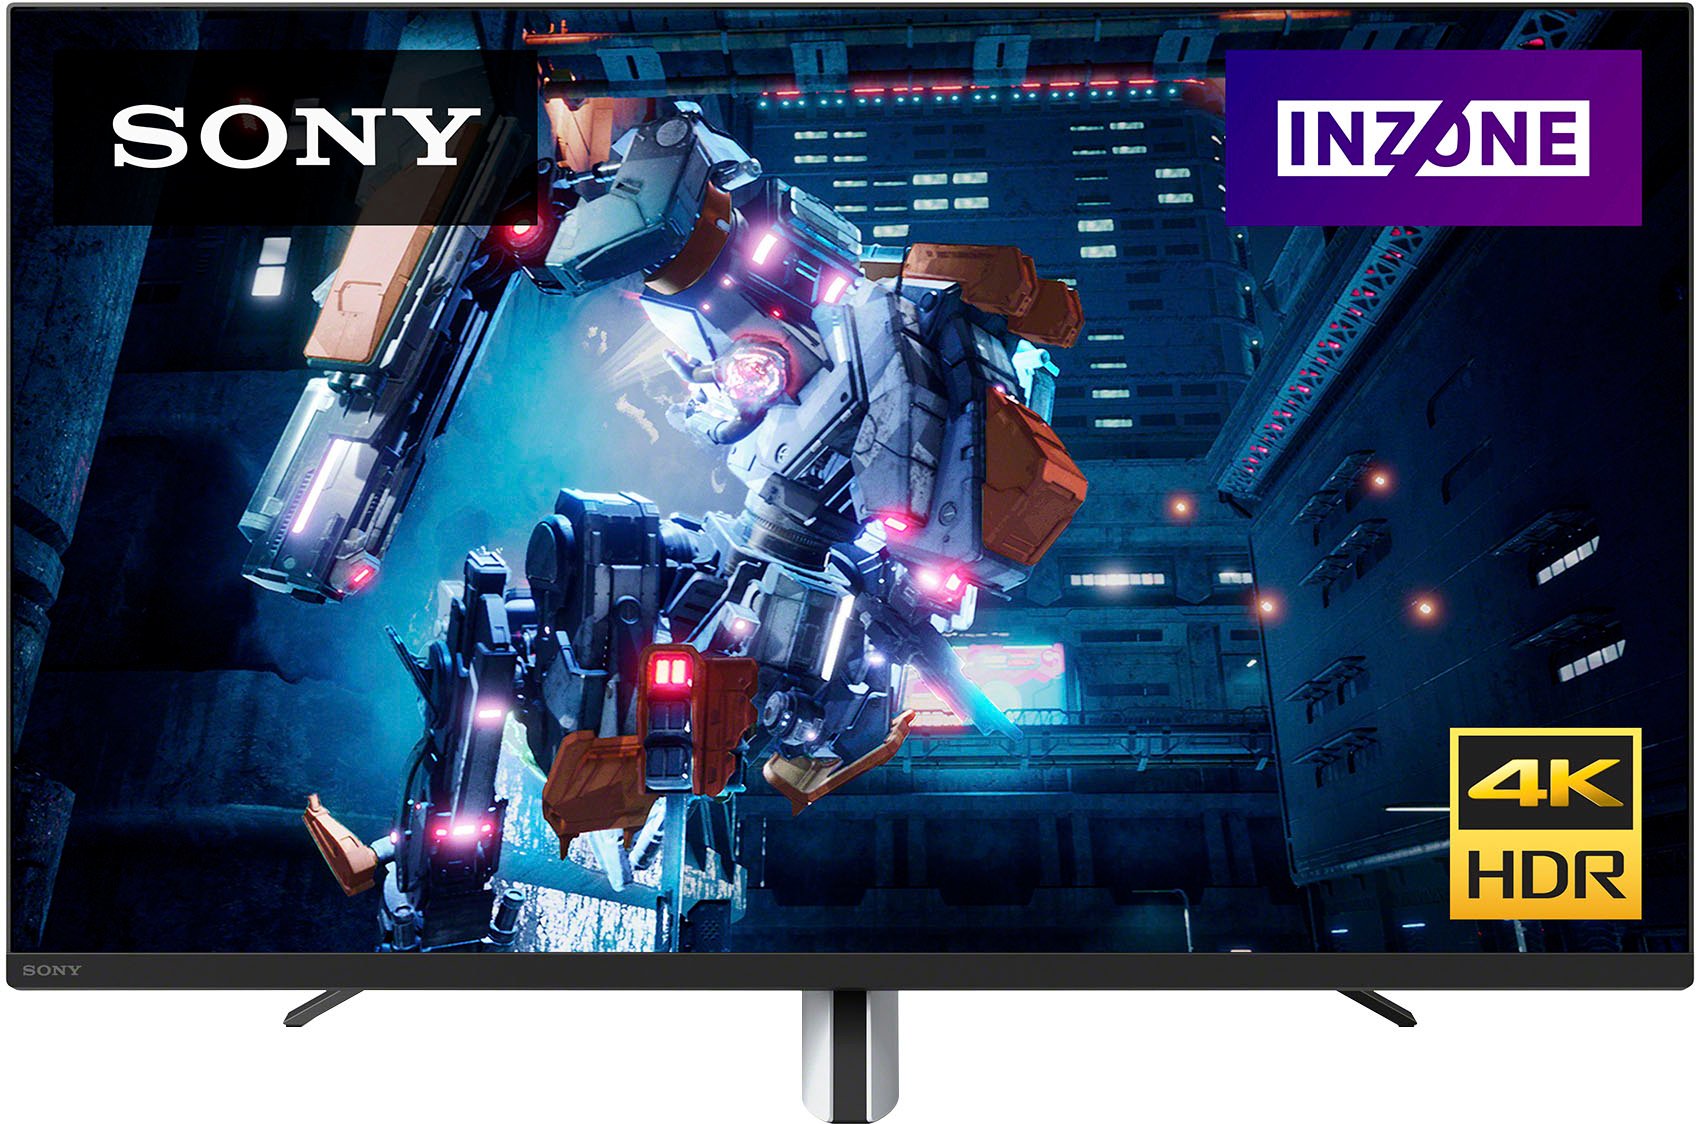 Sony BRAVIA's Full Array LED TVs with local dimming give you more realistic  peaks of brightness, more accurate shadow detail and deeper, inkier blacks.